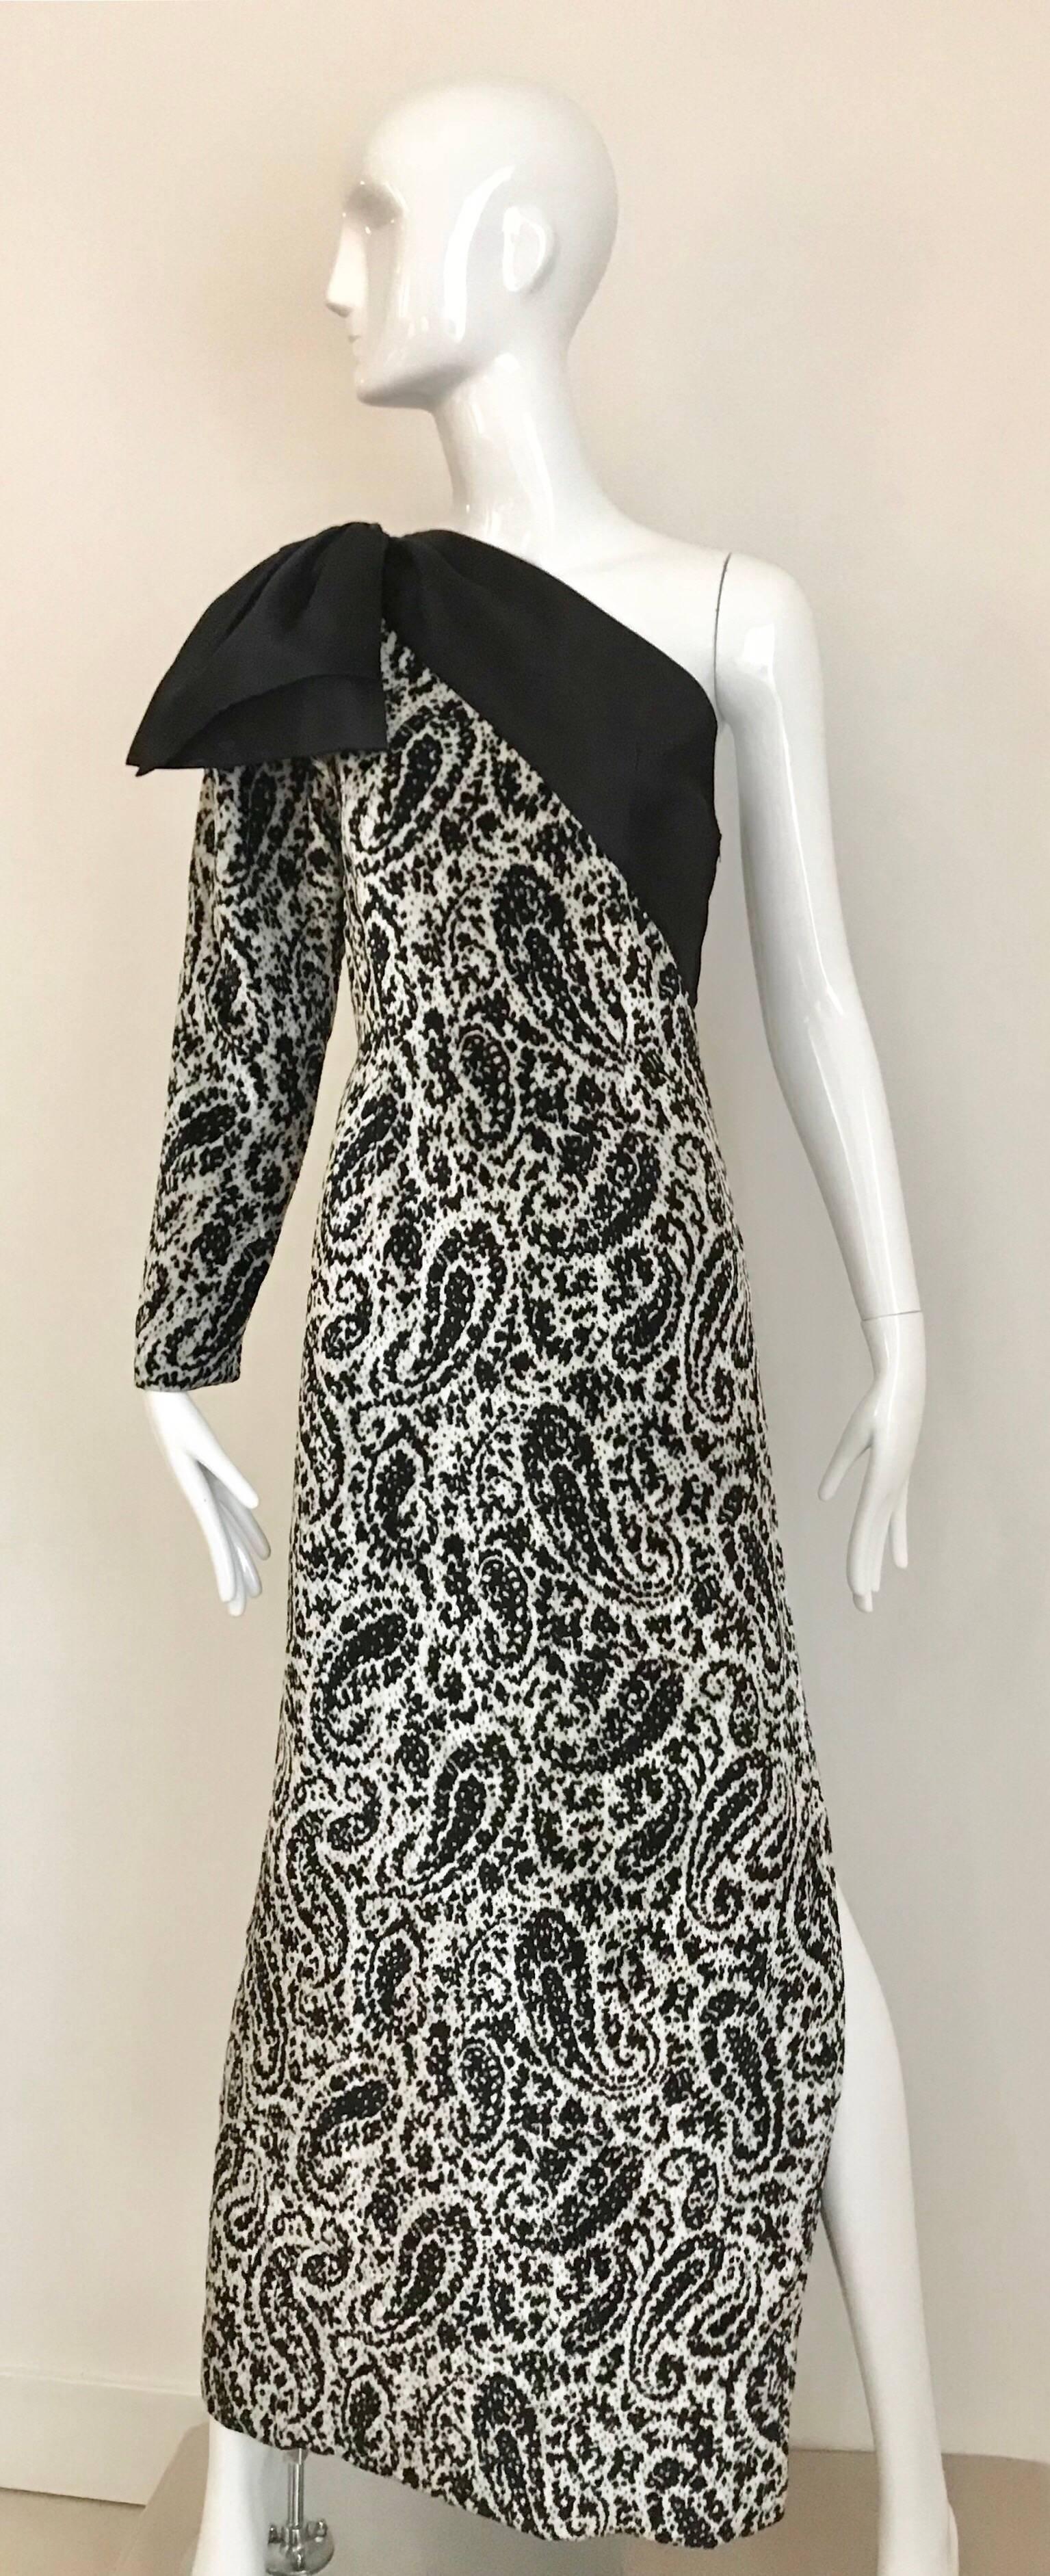 This Lanvin evening gown is both a classy, elegant fashion statement, as well as being fun!, The 90's black & white velvet paisley print, with one shoulder bow really makes a statement. Classic beauty, while keeping you toasty on a cool fall